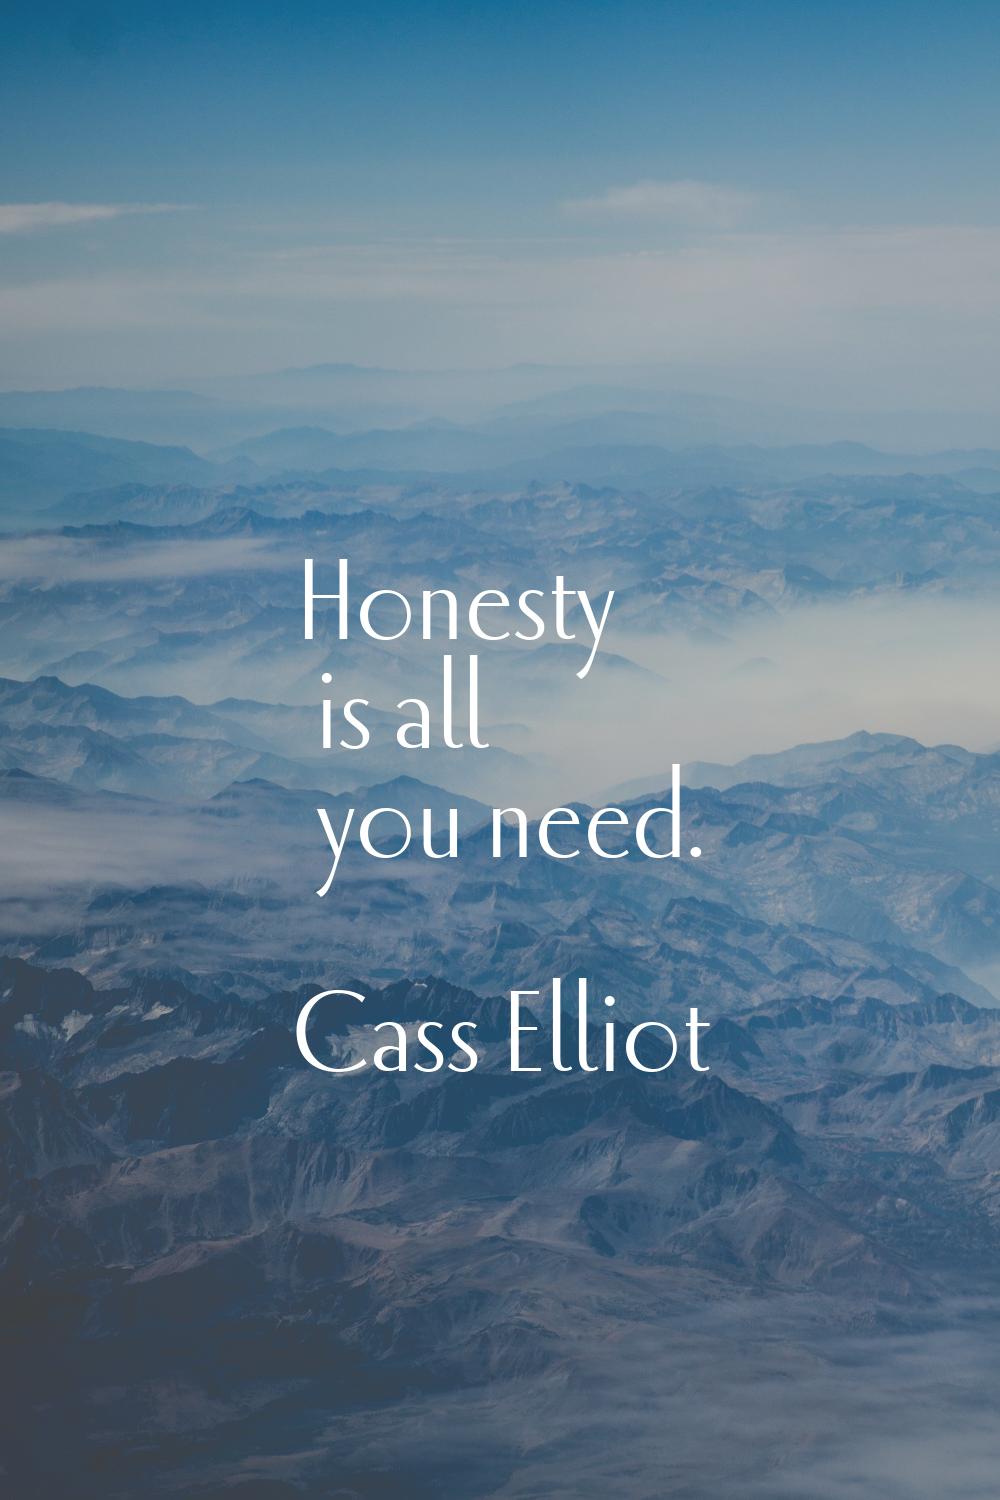 Honesty is all you need.